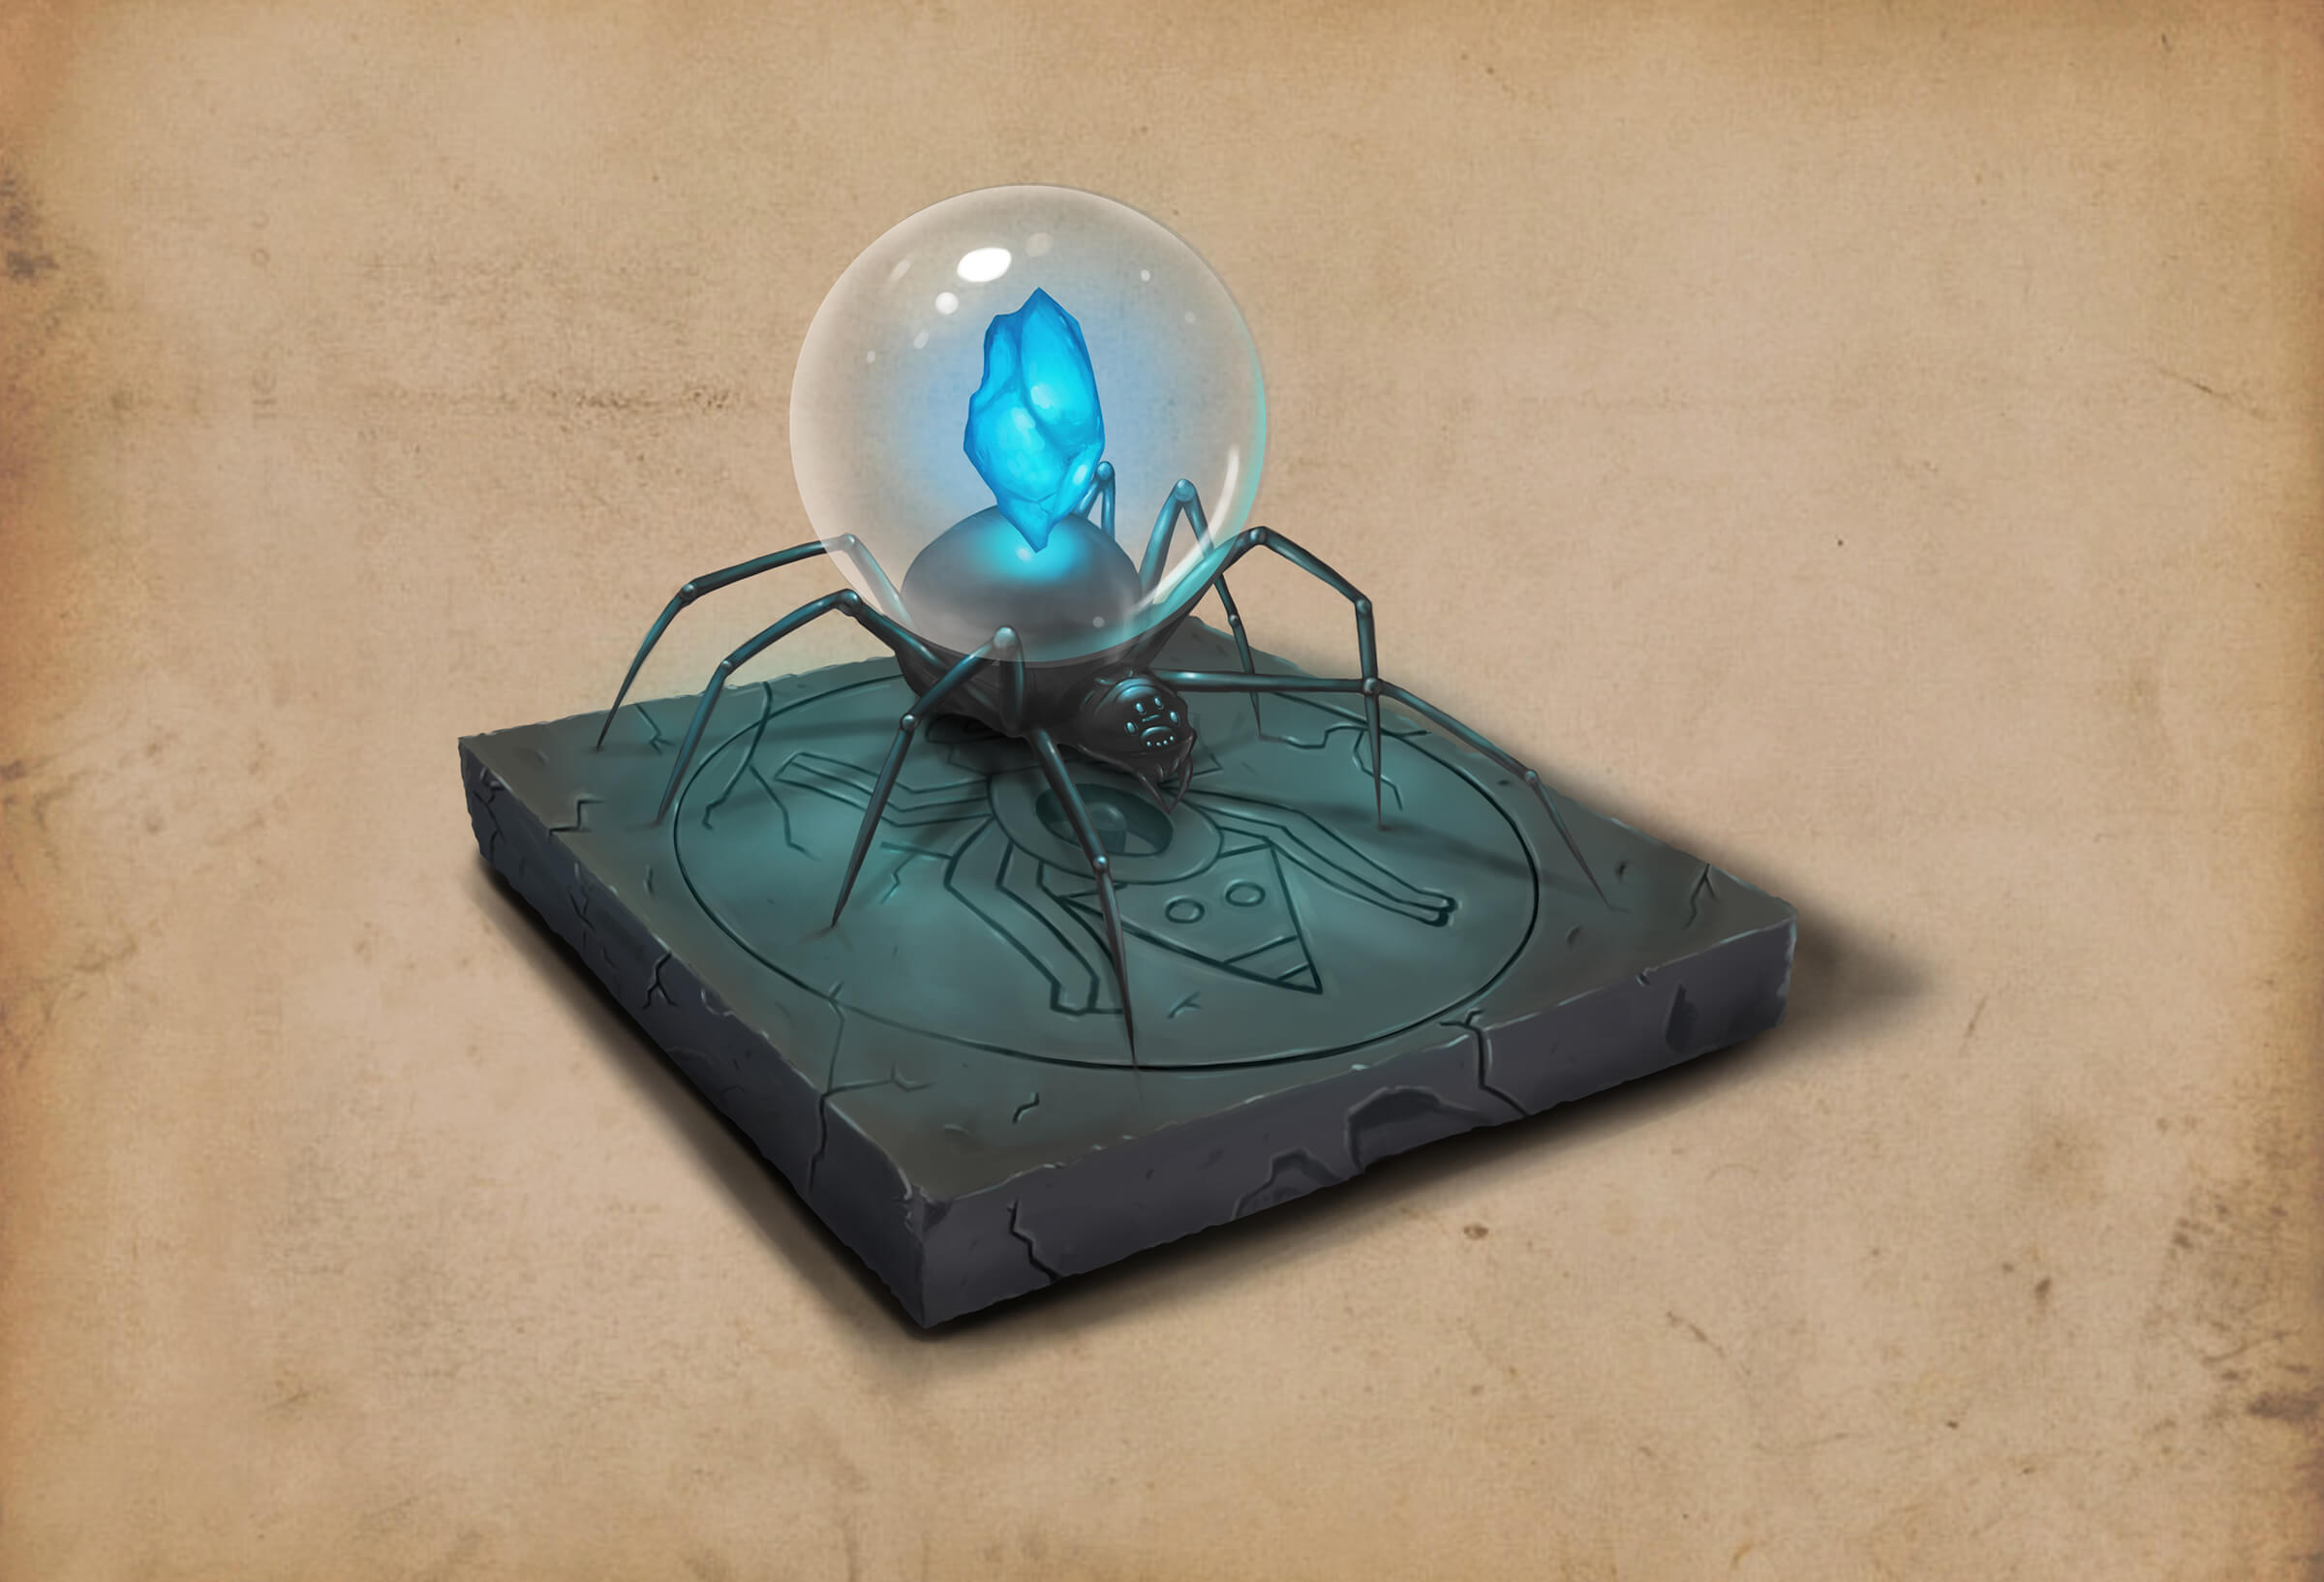 A large black spider with a glowing blue shard on its back, resting on a stone slab with a tribal symbol carved into it.